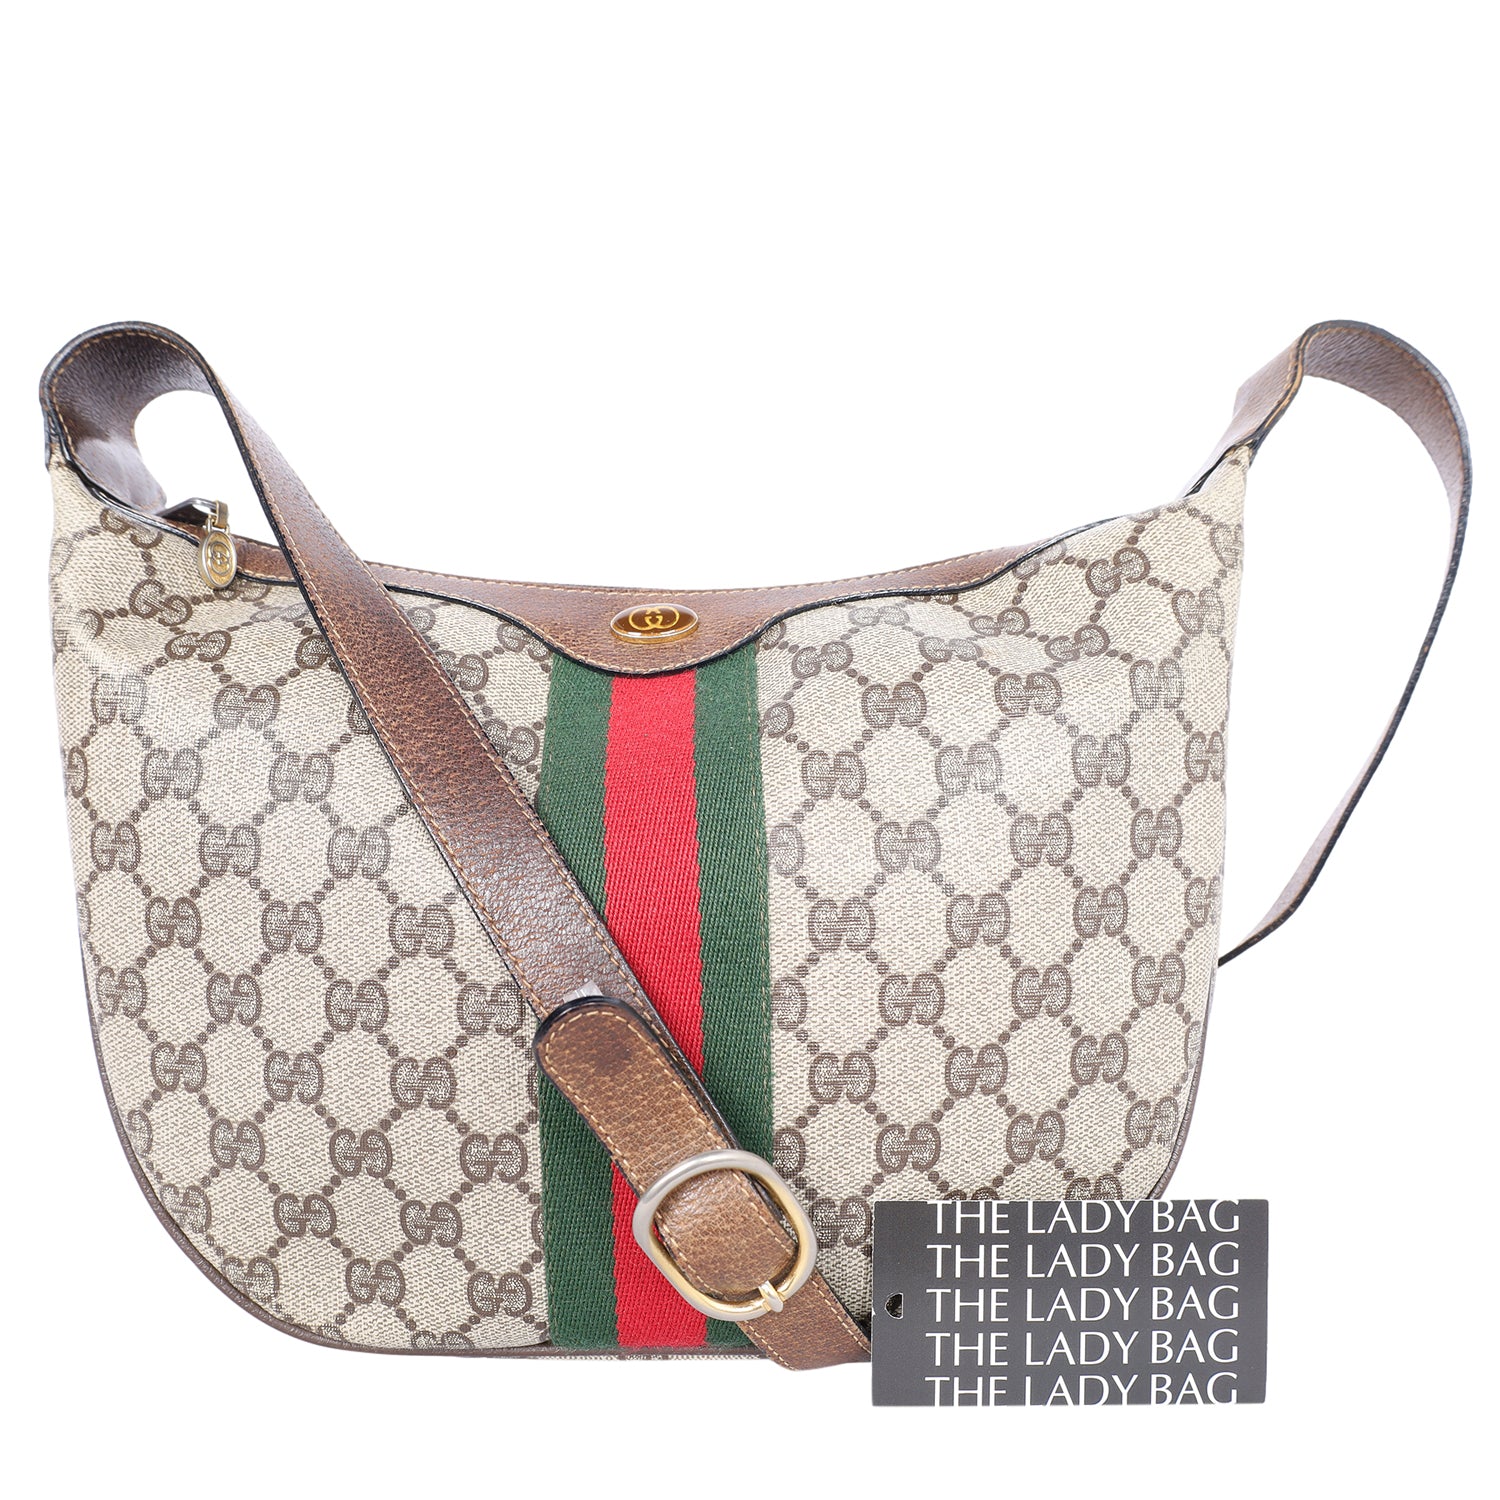 Original Gucci Ophidia GG Small Shoulder Bag for Sale in New